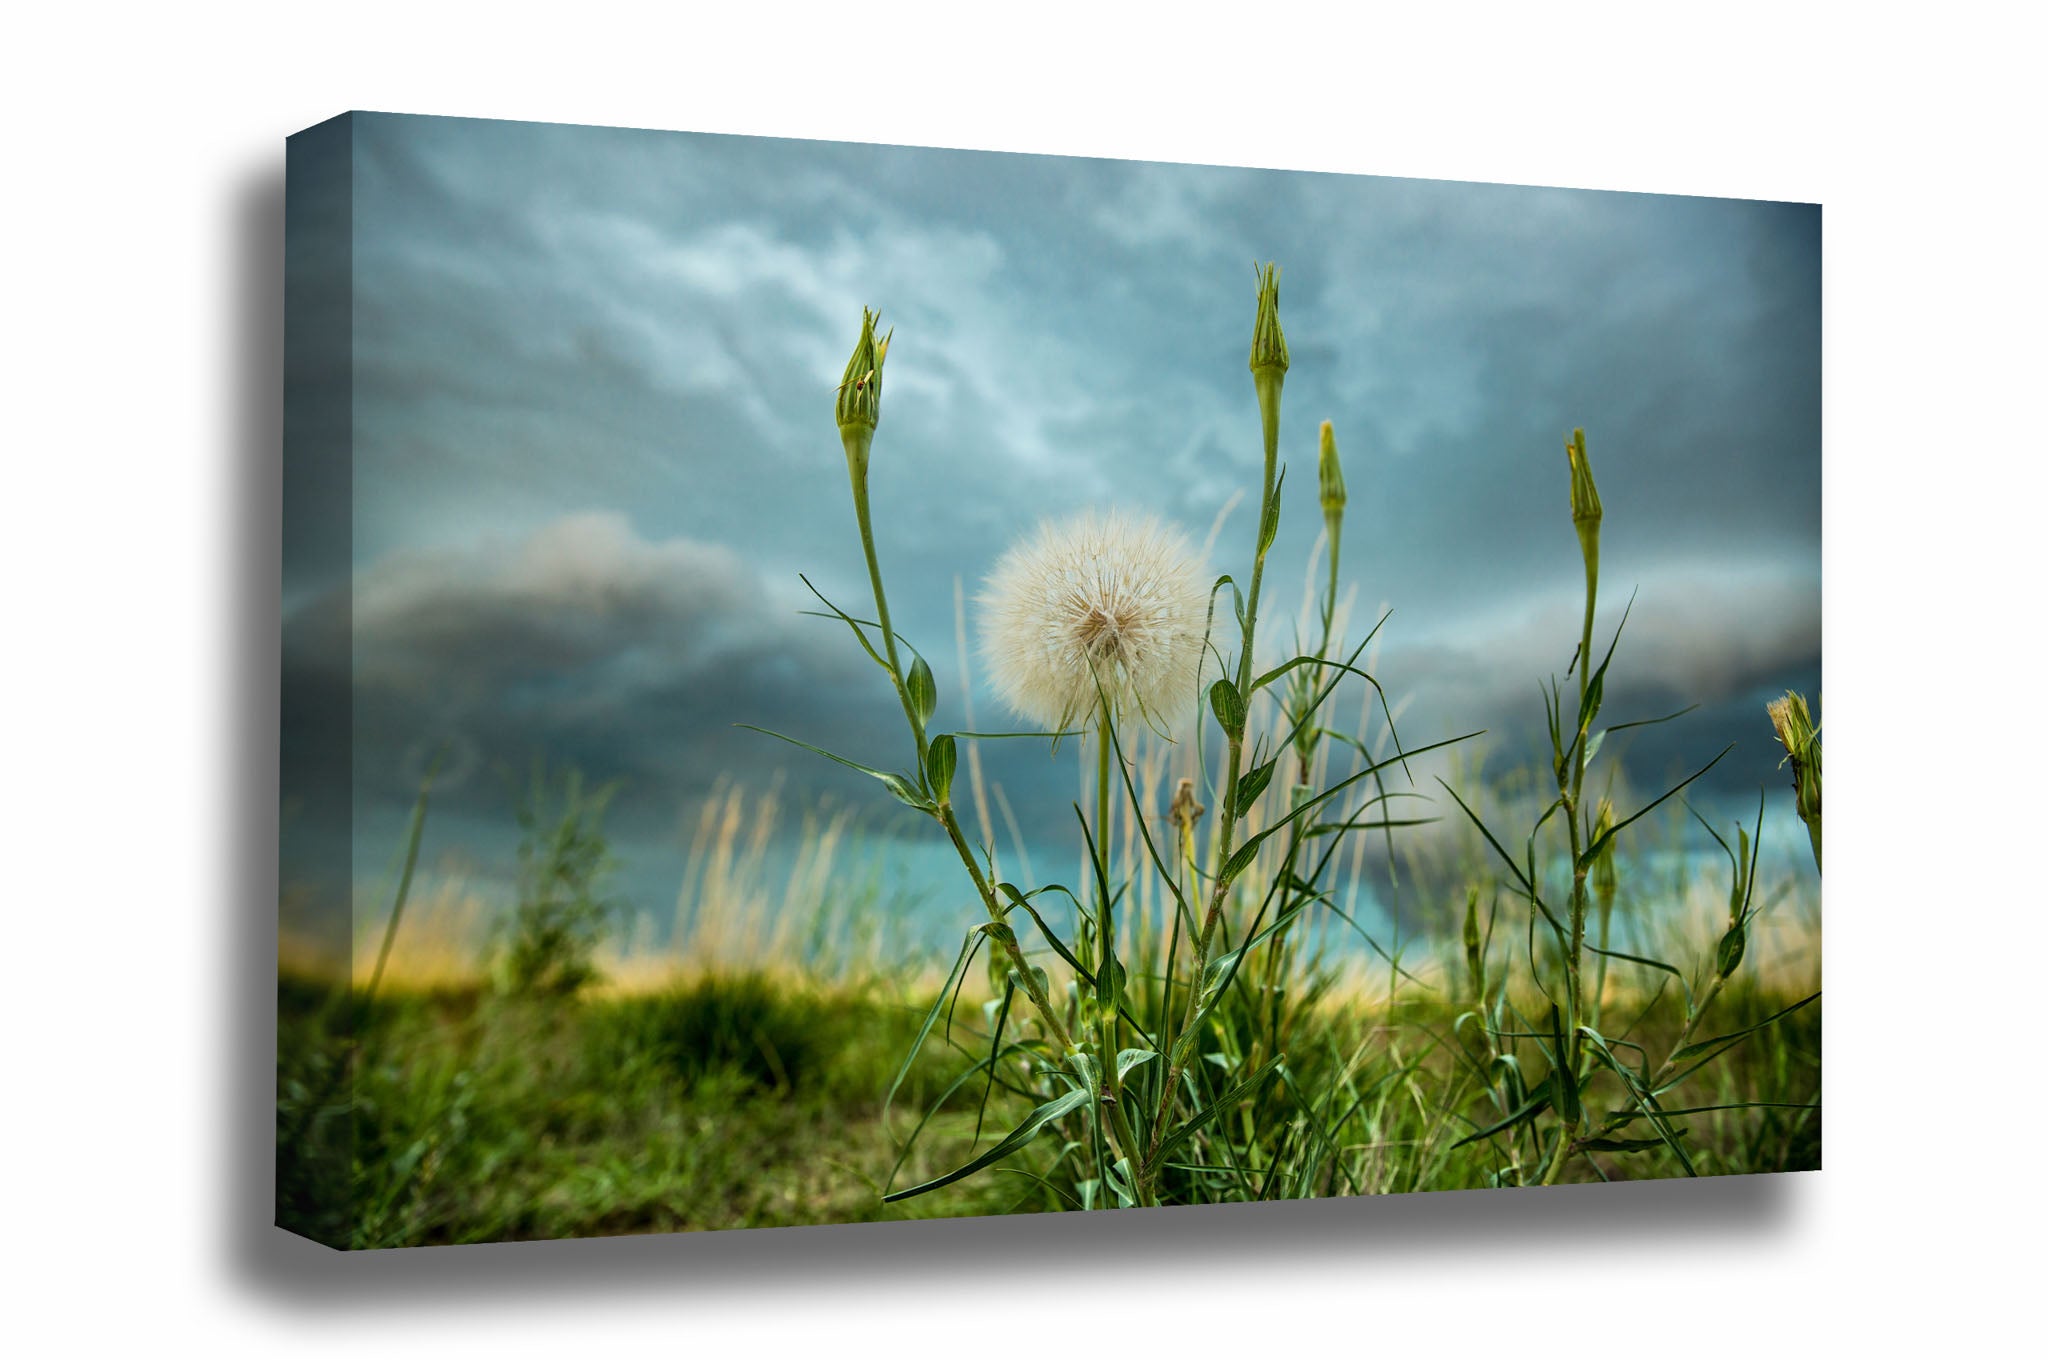 Botanical canvas wall art of a giant dandelion standing tall as a storm approaches on a spring day on the plains of Colorado by Sean Ramsey of Southern Plains Photography.